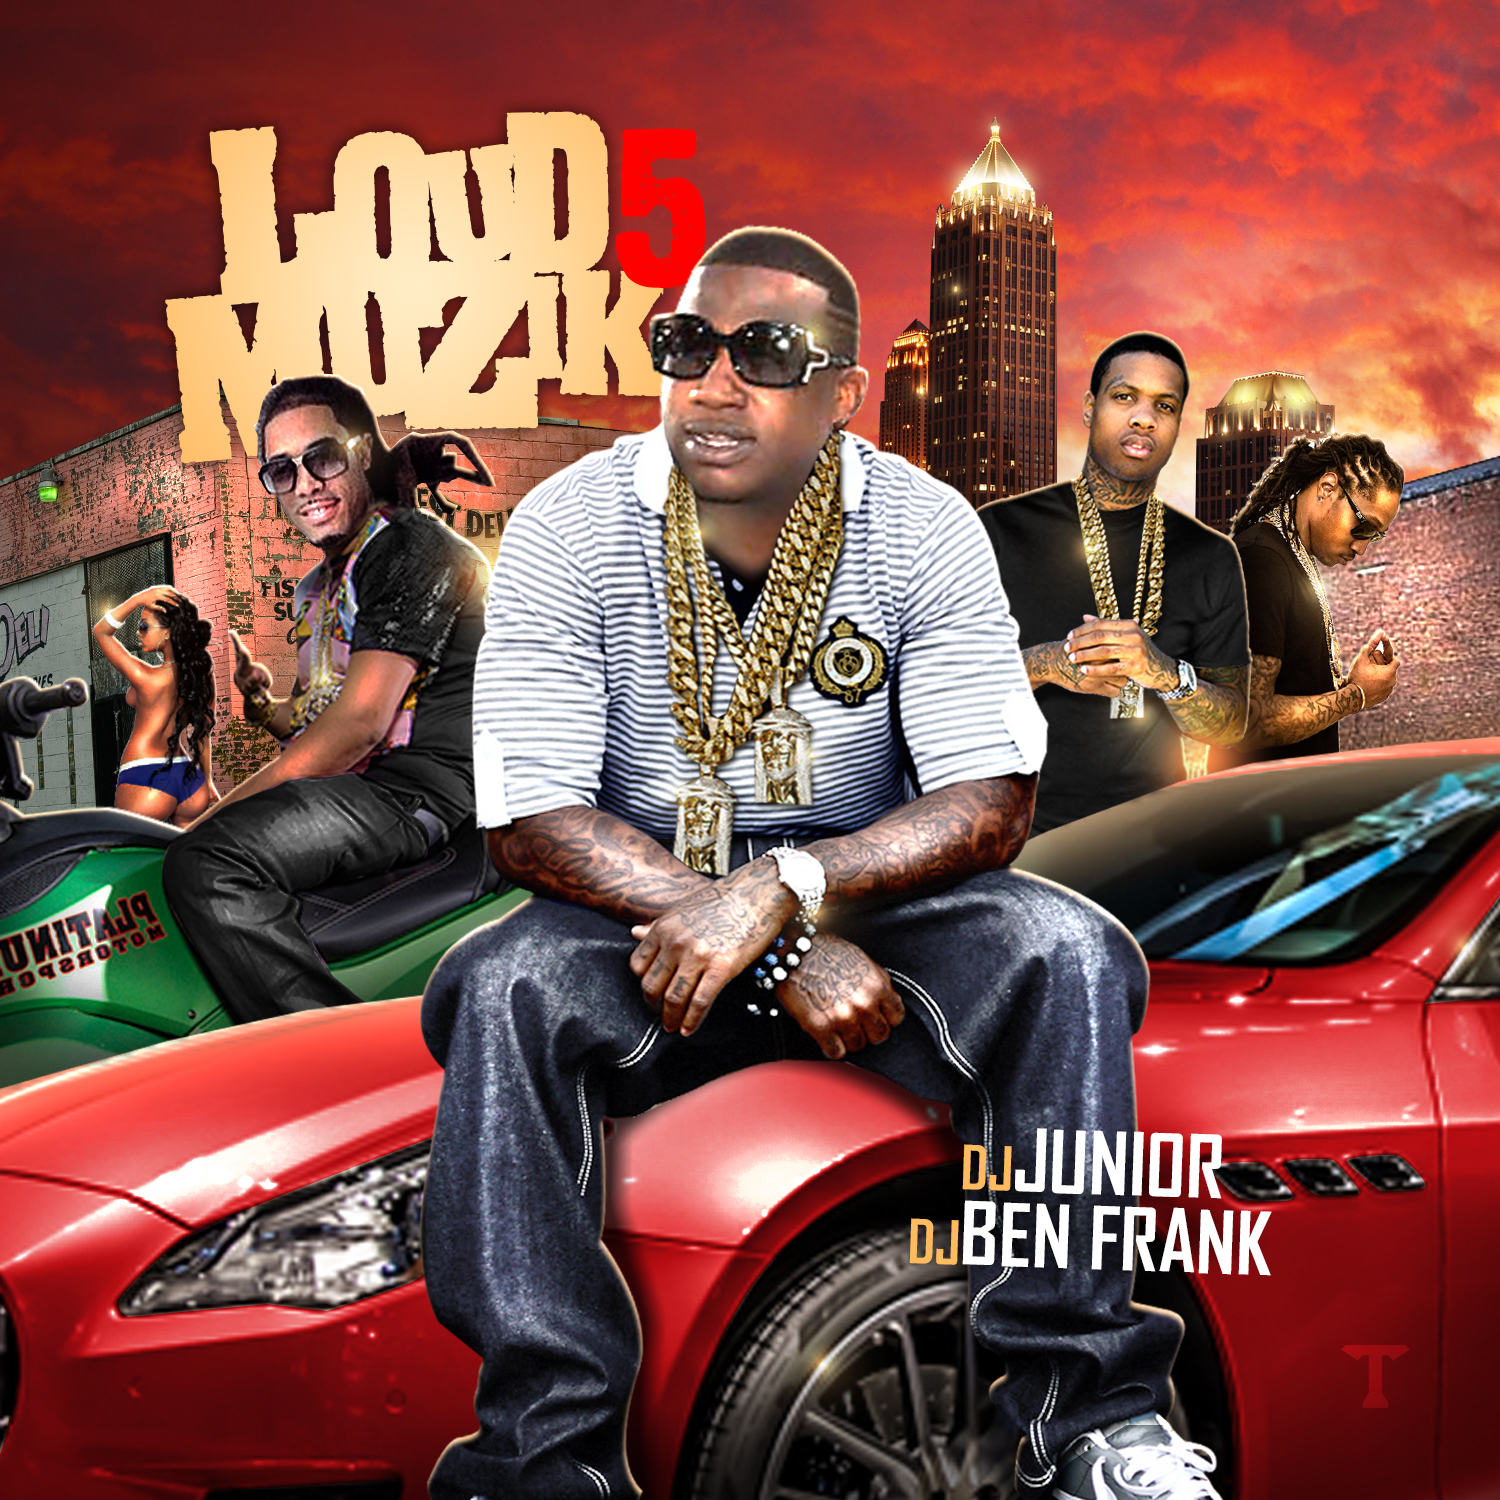 Gucci mane old album covers